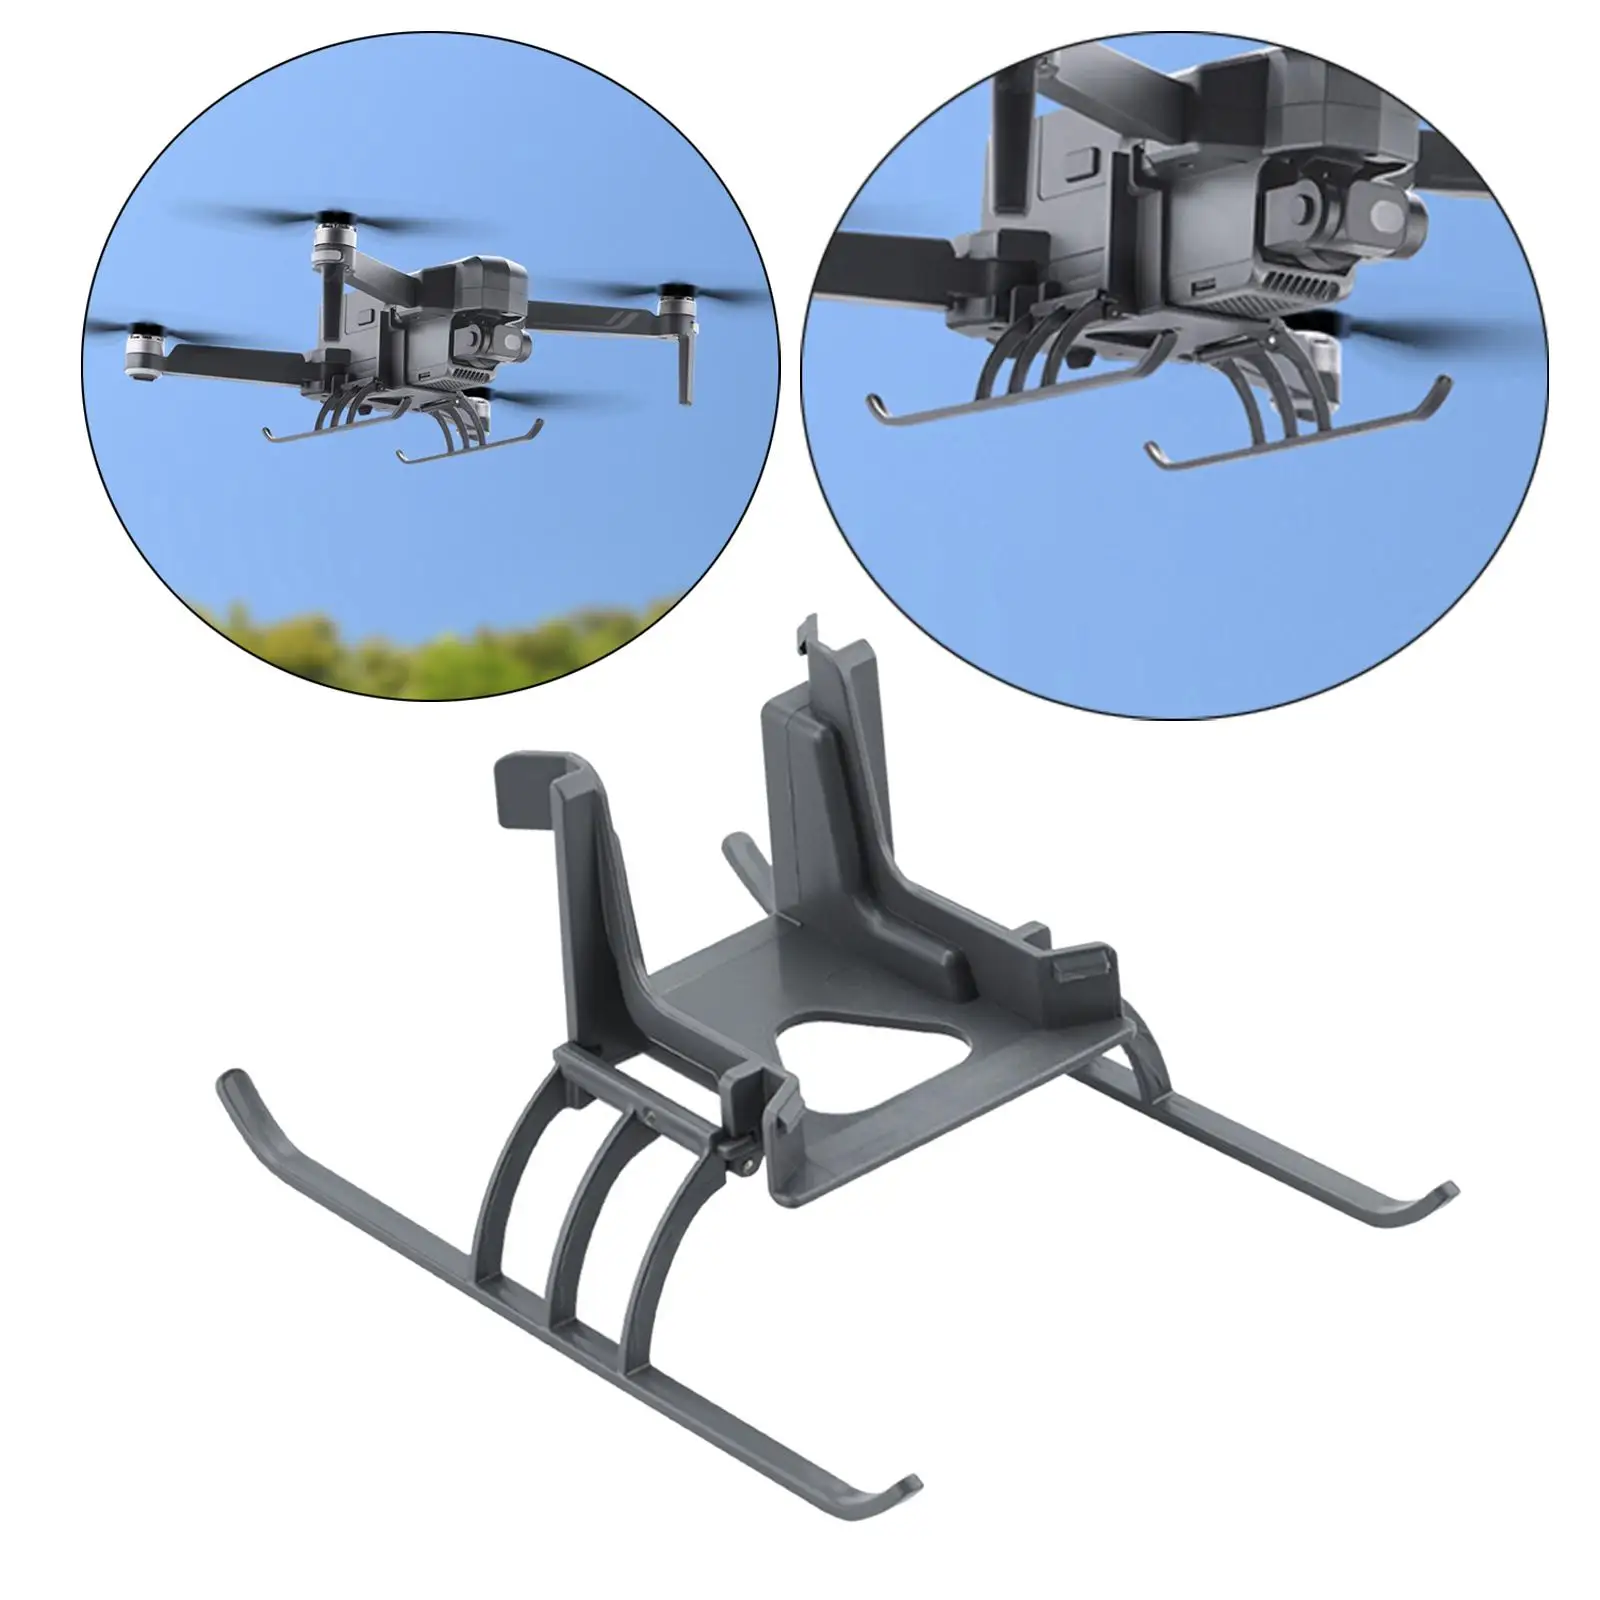 Landing Gear Leg Foldable Shockproof Gimbal Protector Height Extender for Sjrc F11S Drone Portable Drone Accessories Durable